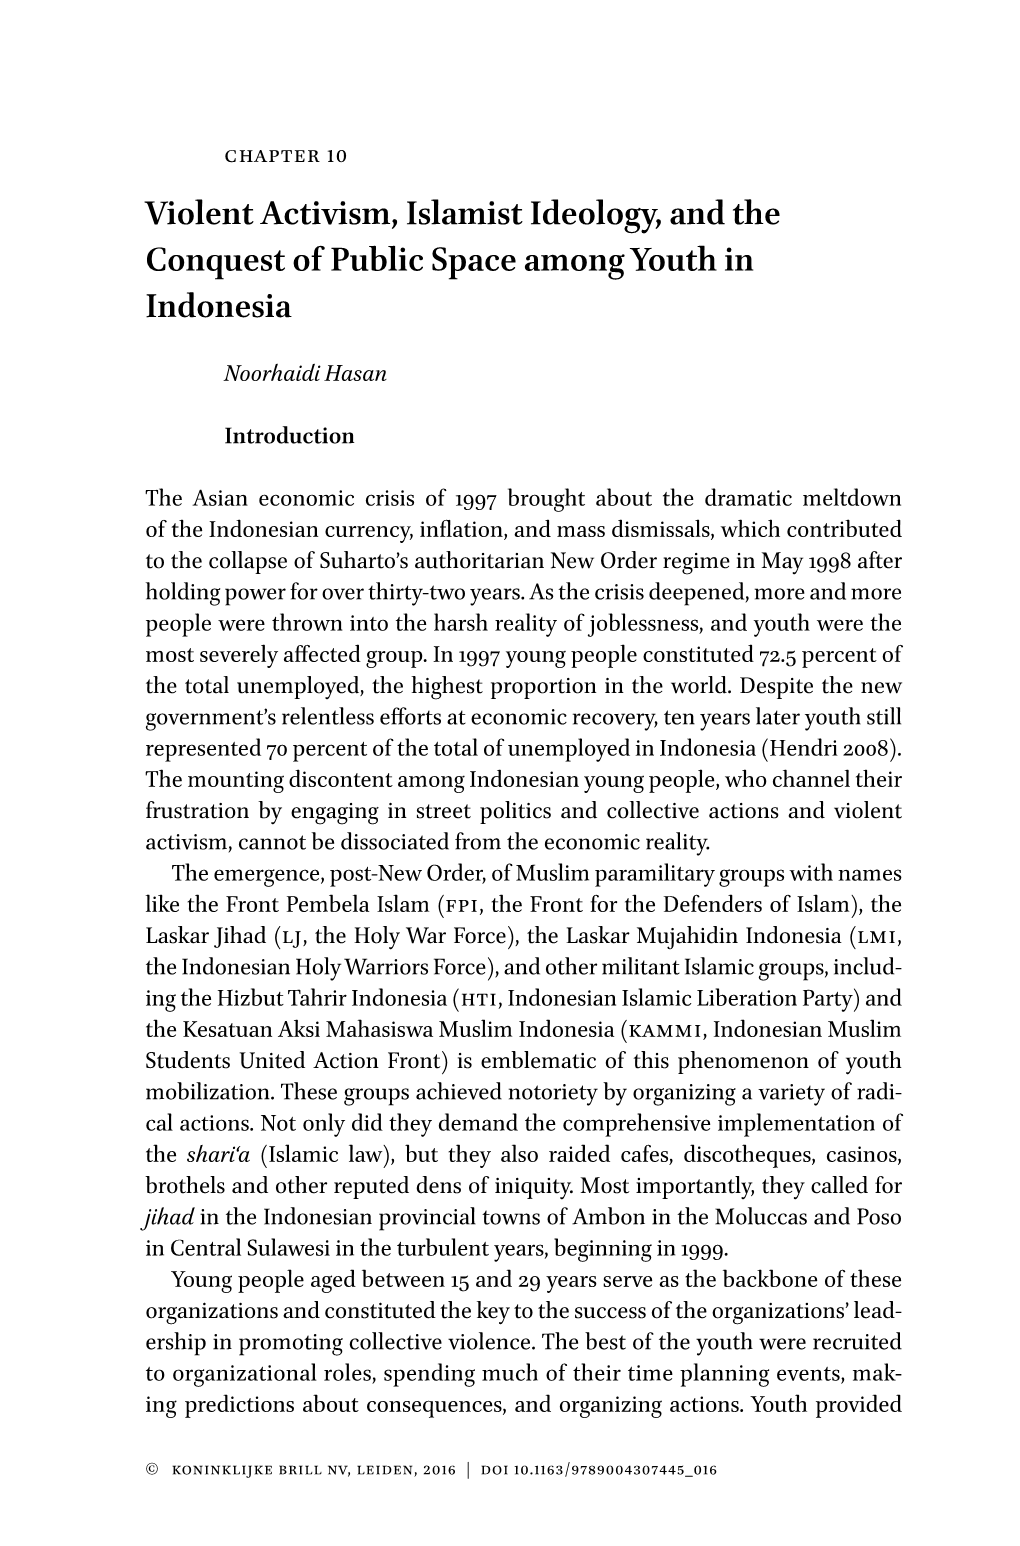 Violent Activism, Islamist Ideology, and the Conquest of Public Space Among Youth in Indonesia